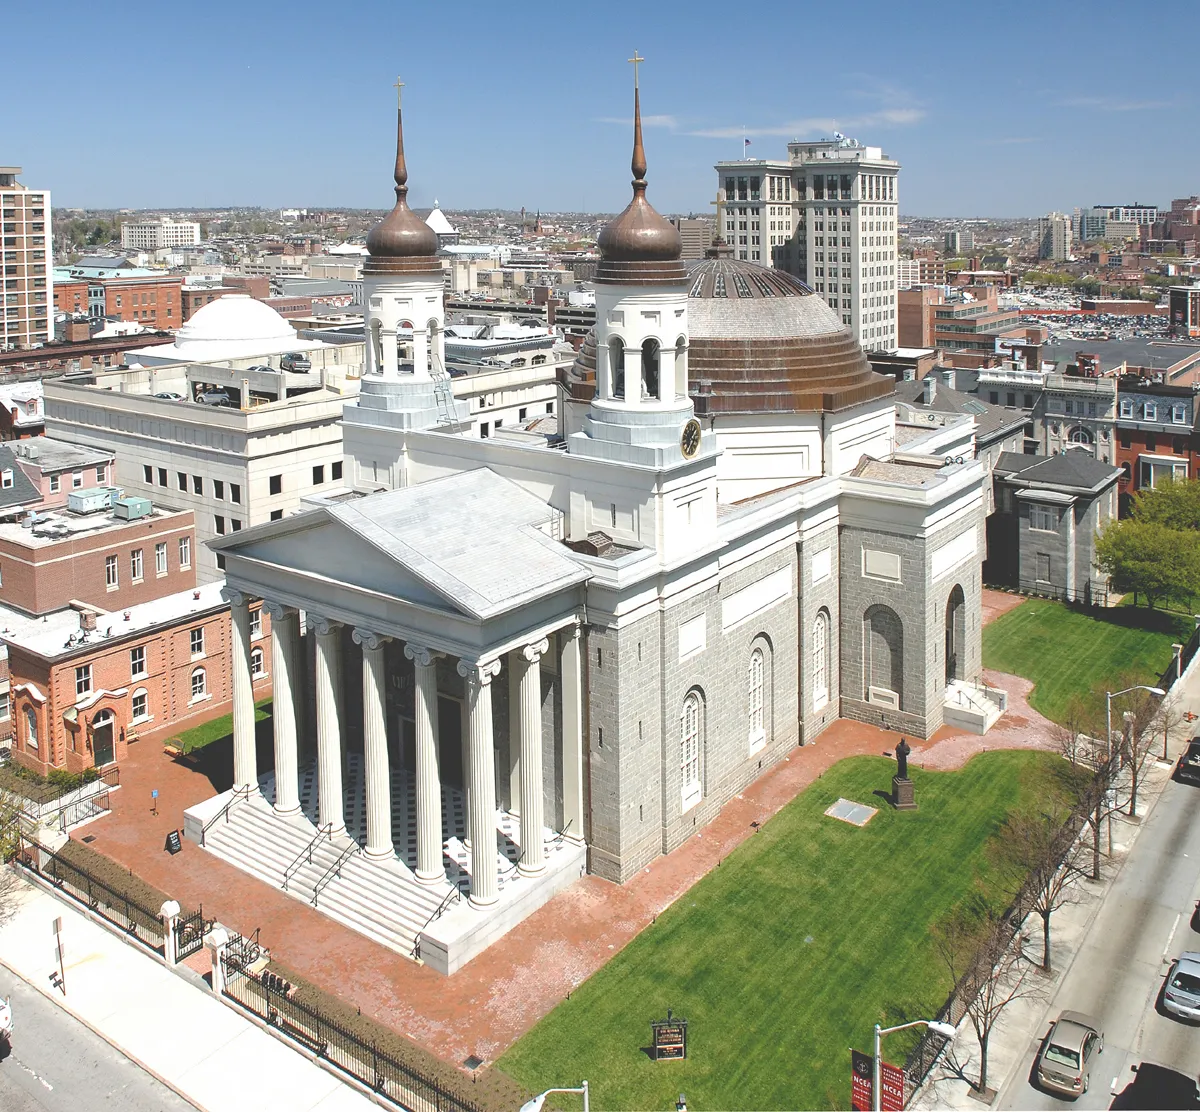 A view of Baltimore's Basilica nestled amid the city's famed row houses.?w=200&h=150